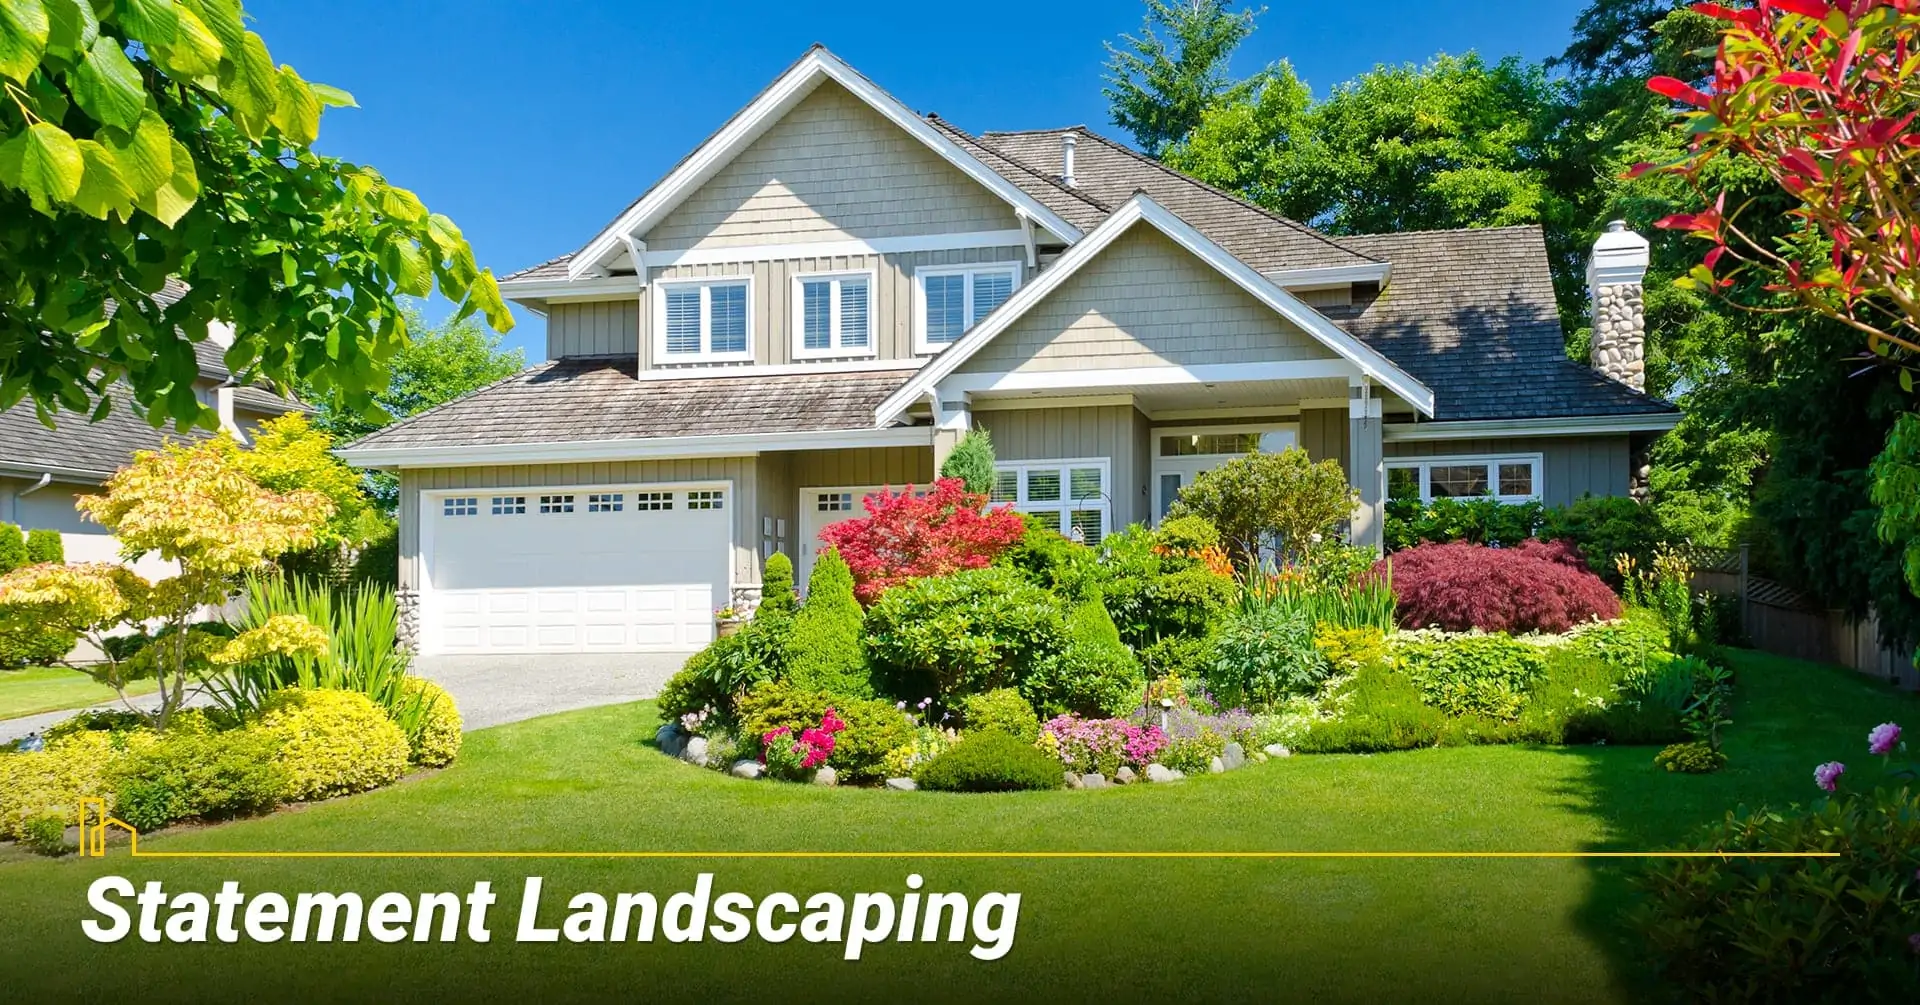 Statement Landscaping, add beautiful landscaping